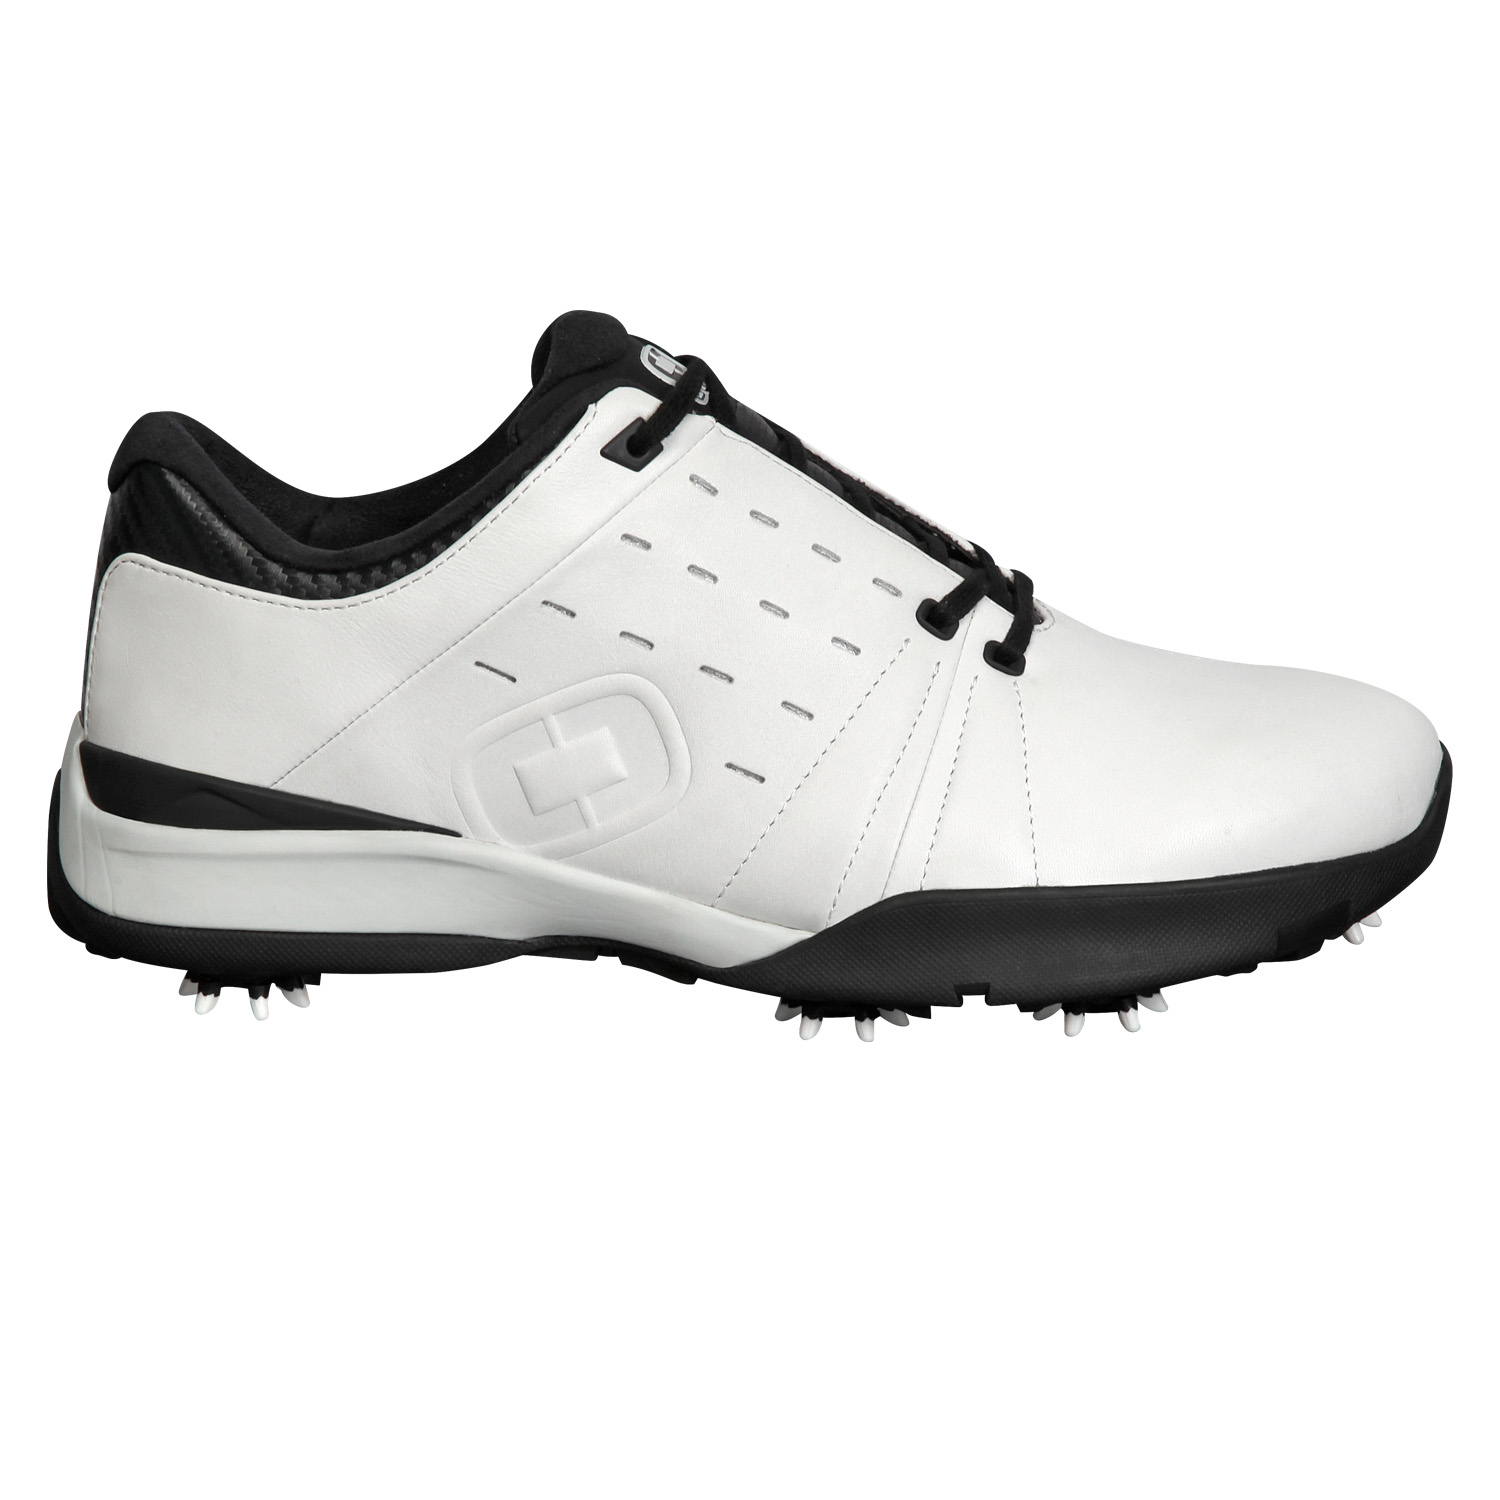 Ogio Puts Best Food Forward With New Golf Shoe Collections - Haggin Oaks